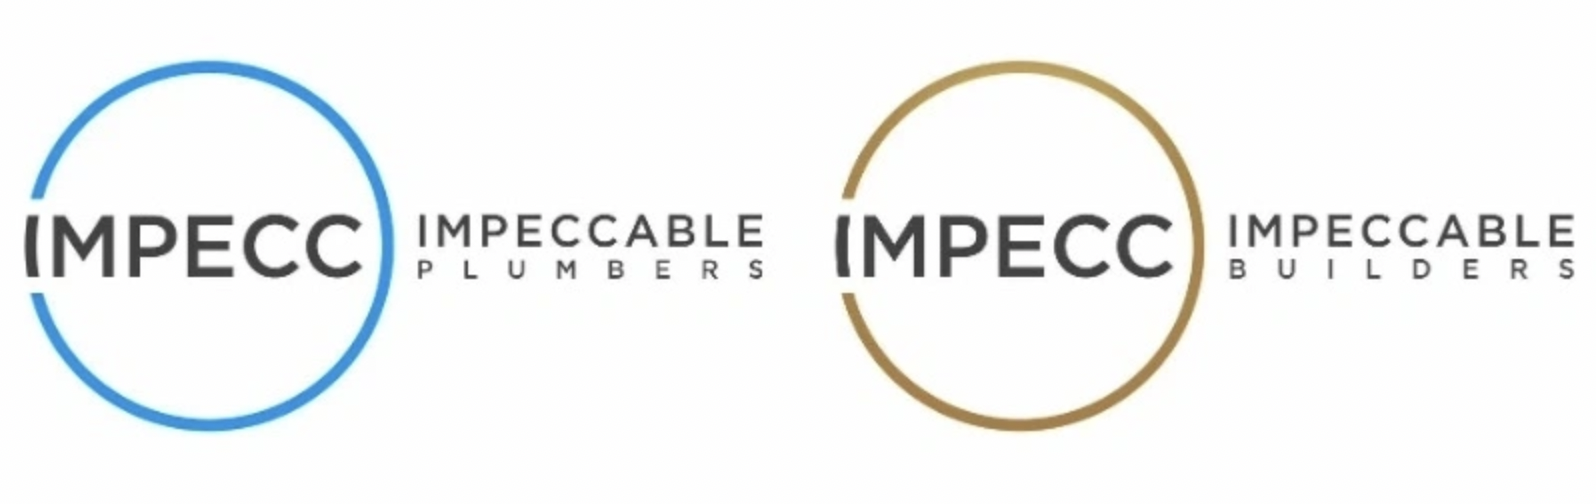 IMPECCABLE PLUMBERS AND RENOVATIONS logo